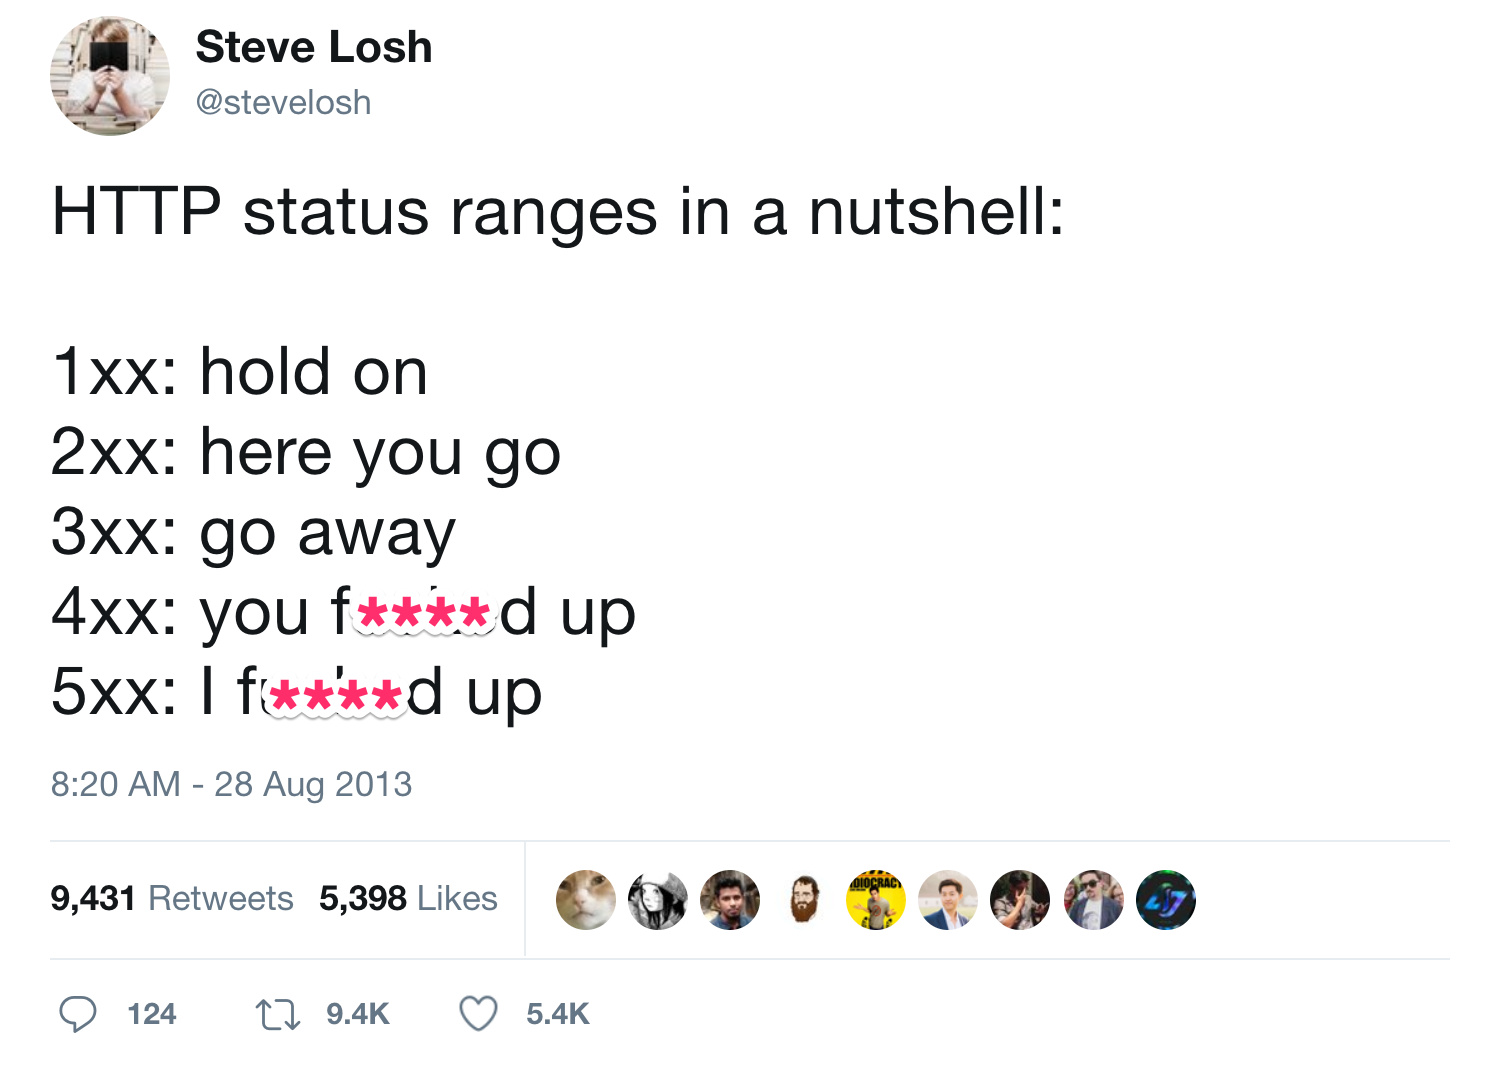 Steve_Losh_on_Twitter___HTTP_status_ranges_in_a_nutshell__1xx__hold_on_2xx__here_you_go_3xx__go_away_4xx__you_fucked_up_5xx__I_fucked_up_.png